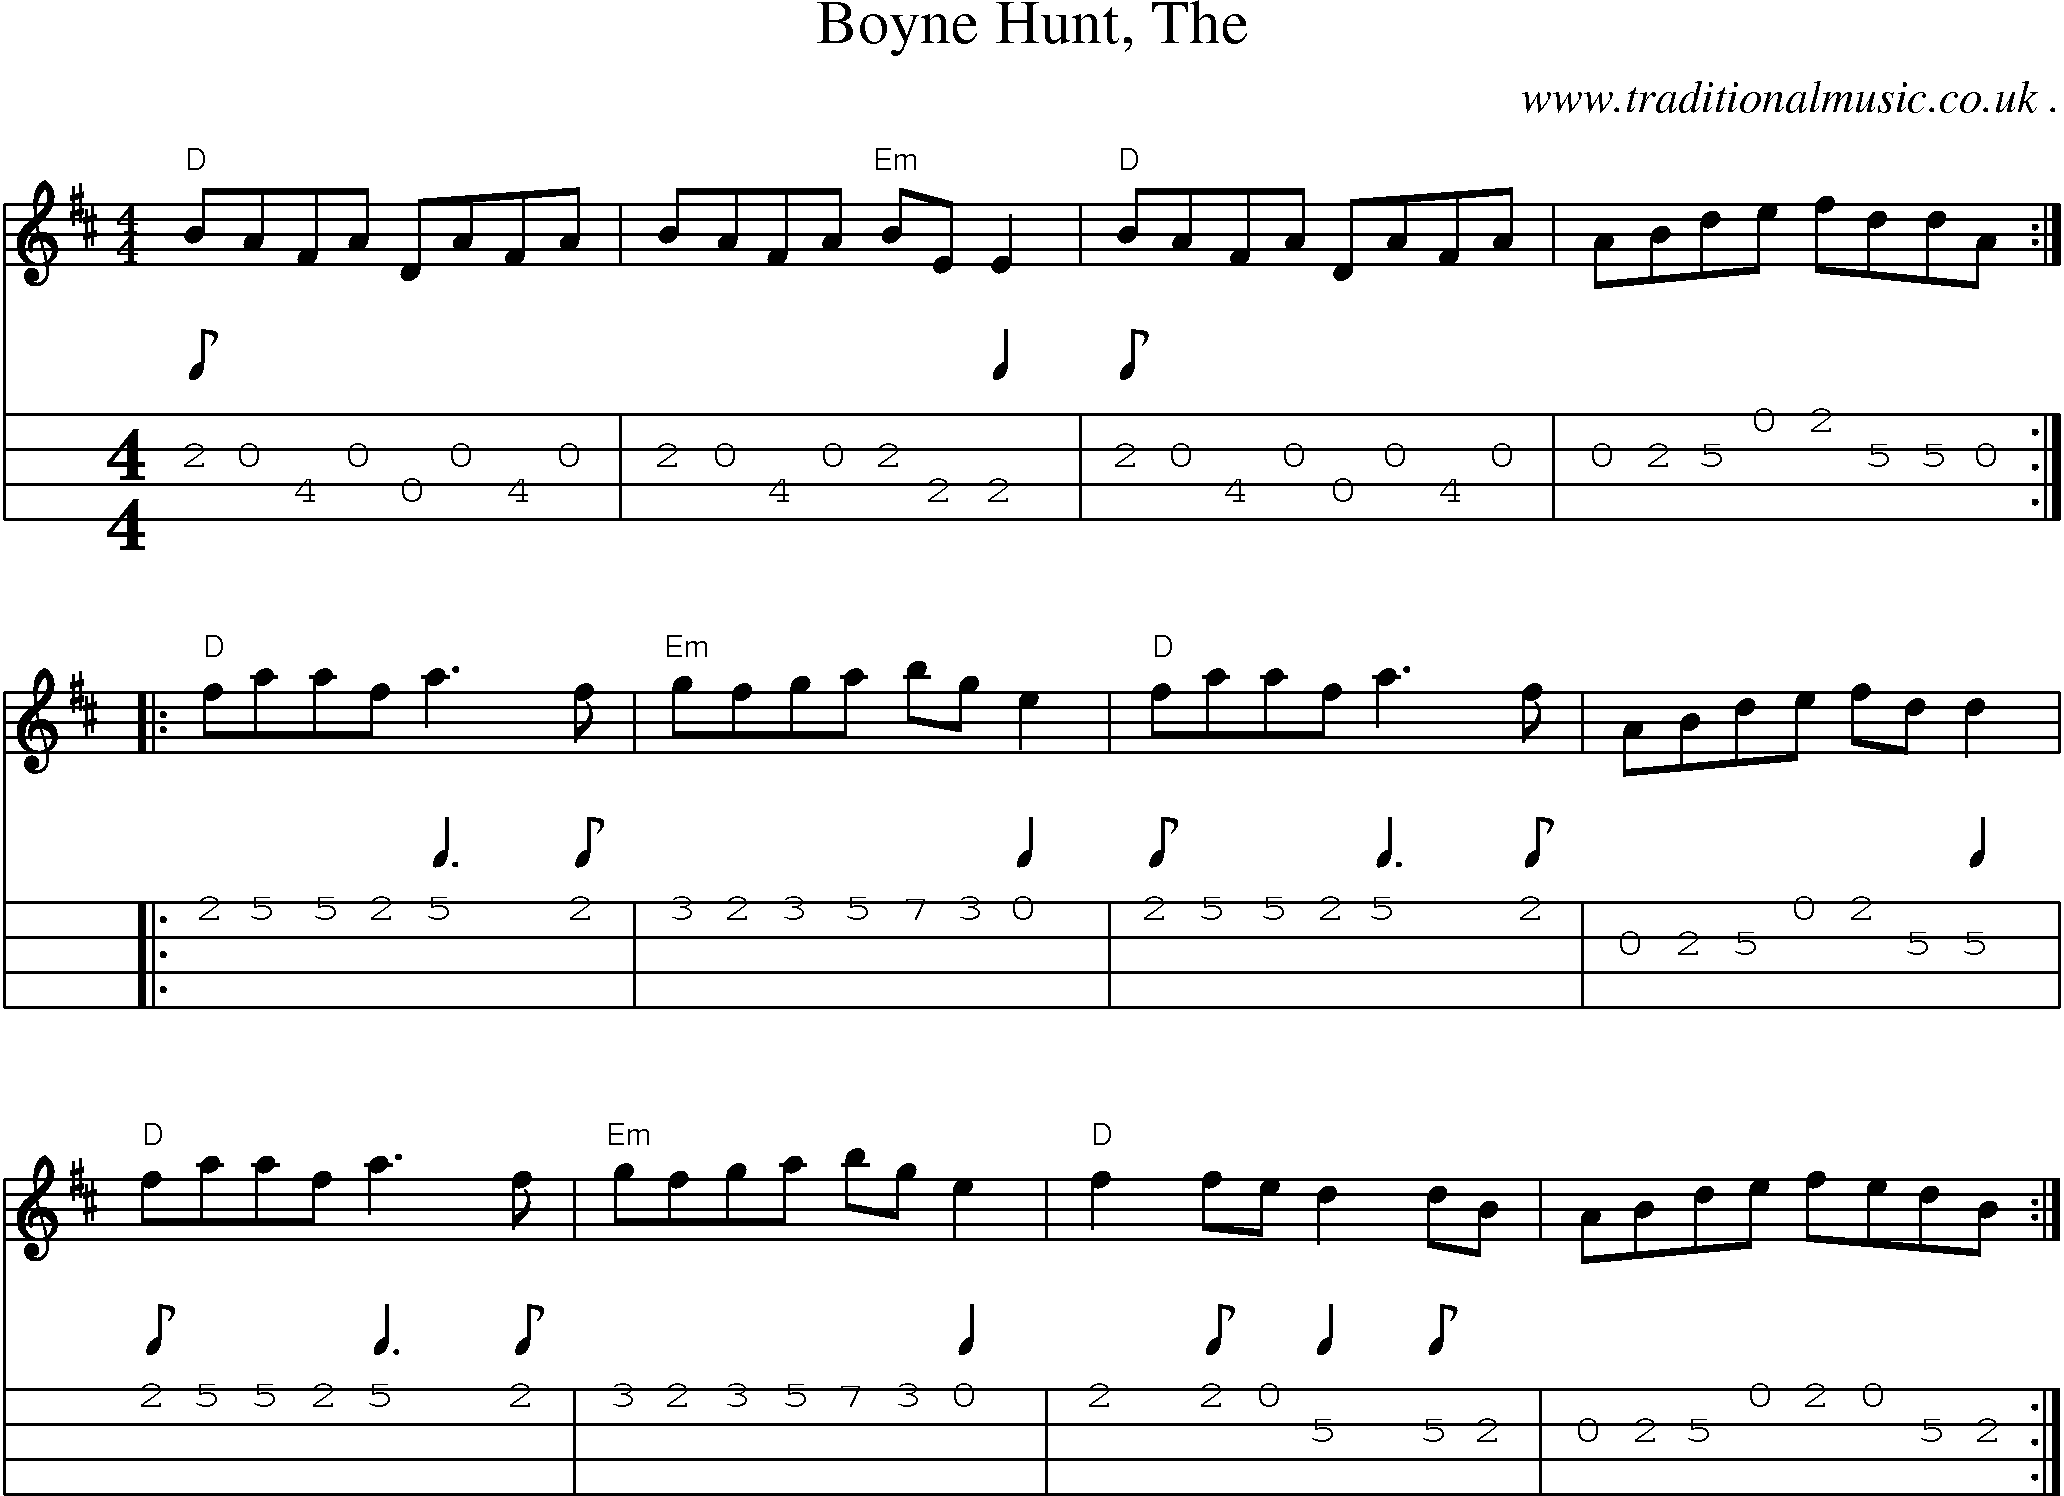 Music Score and Guitar Tabs for Boyne Hunt The